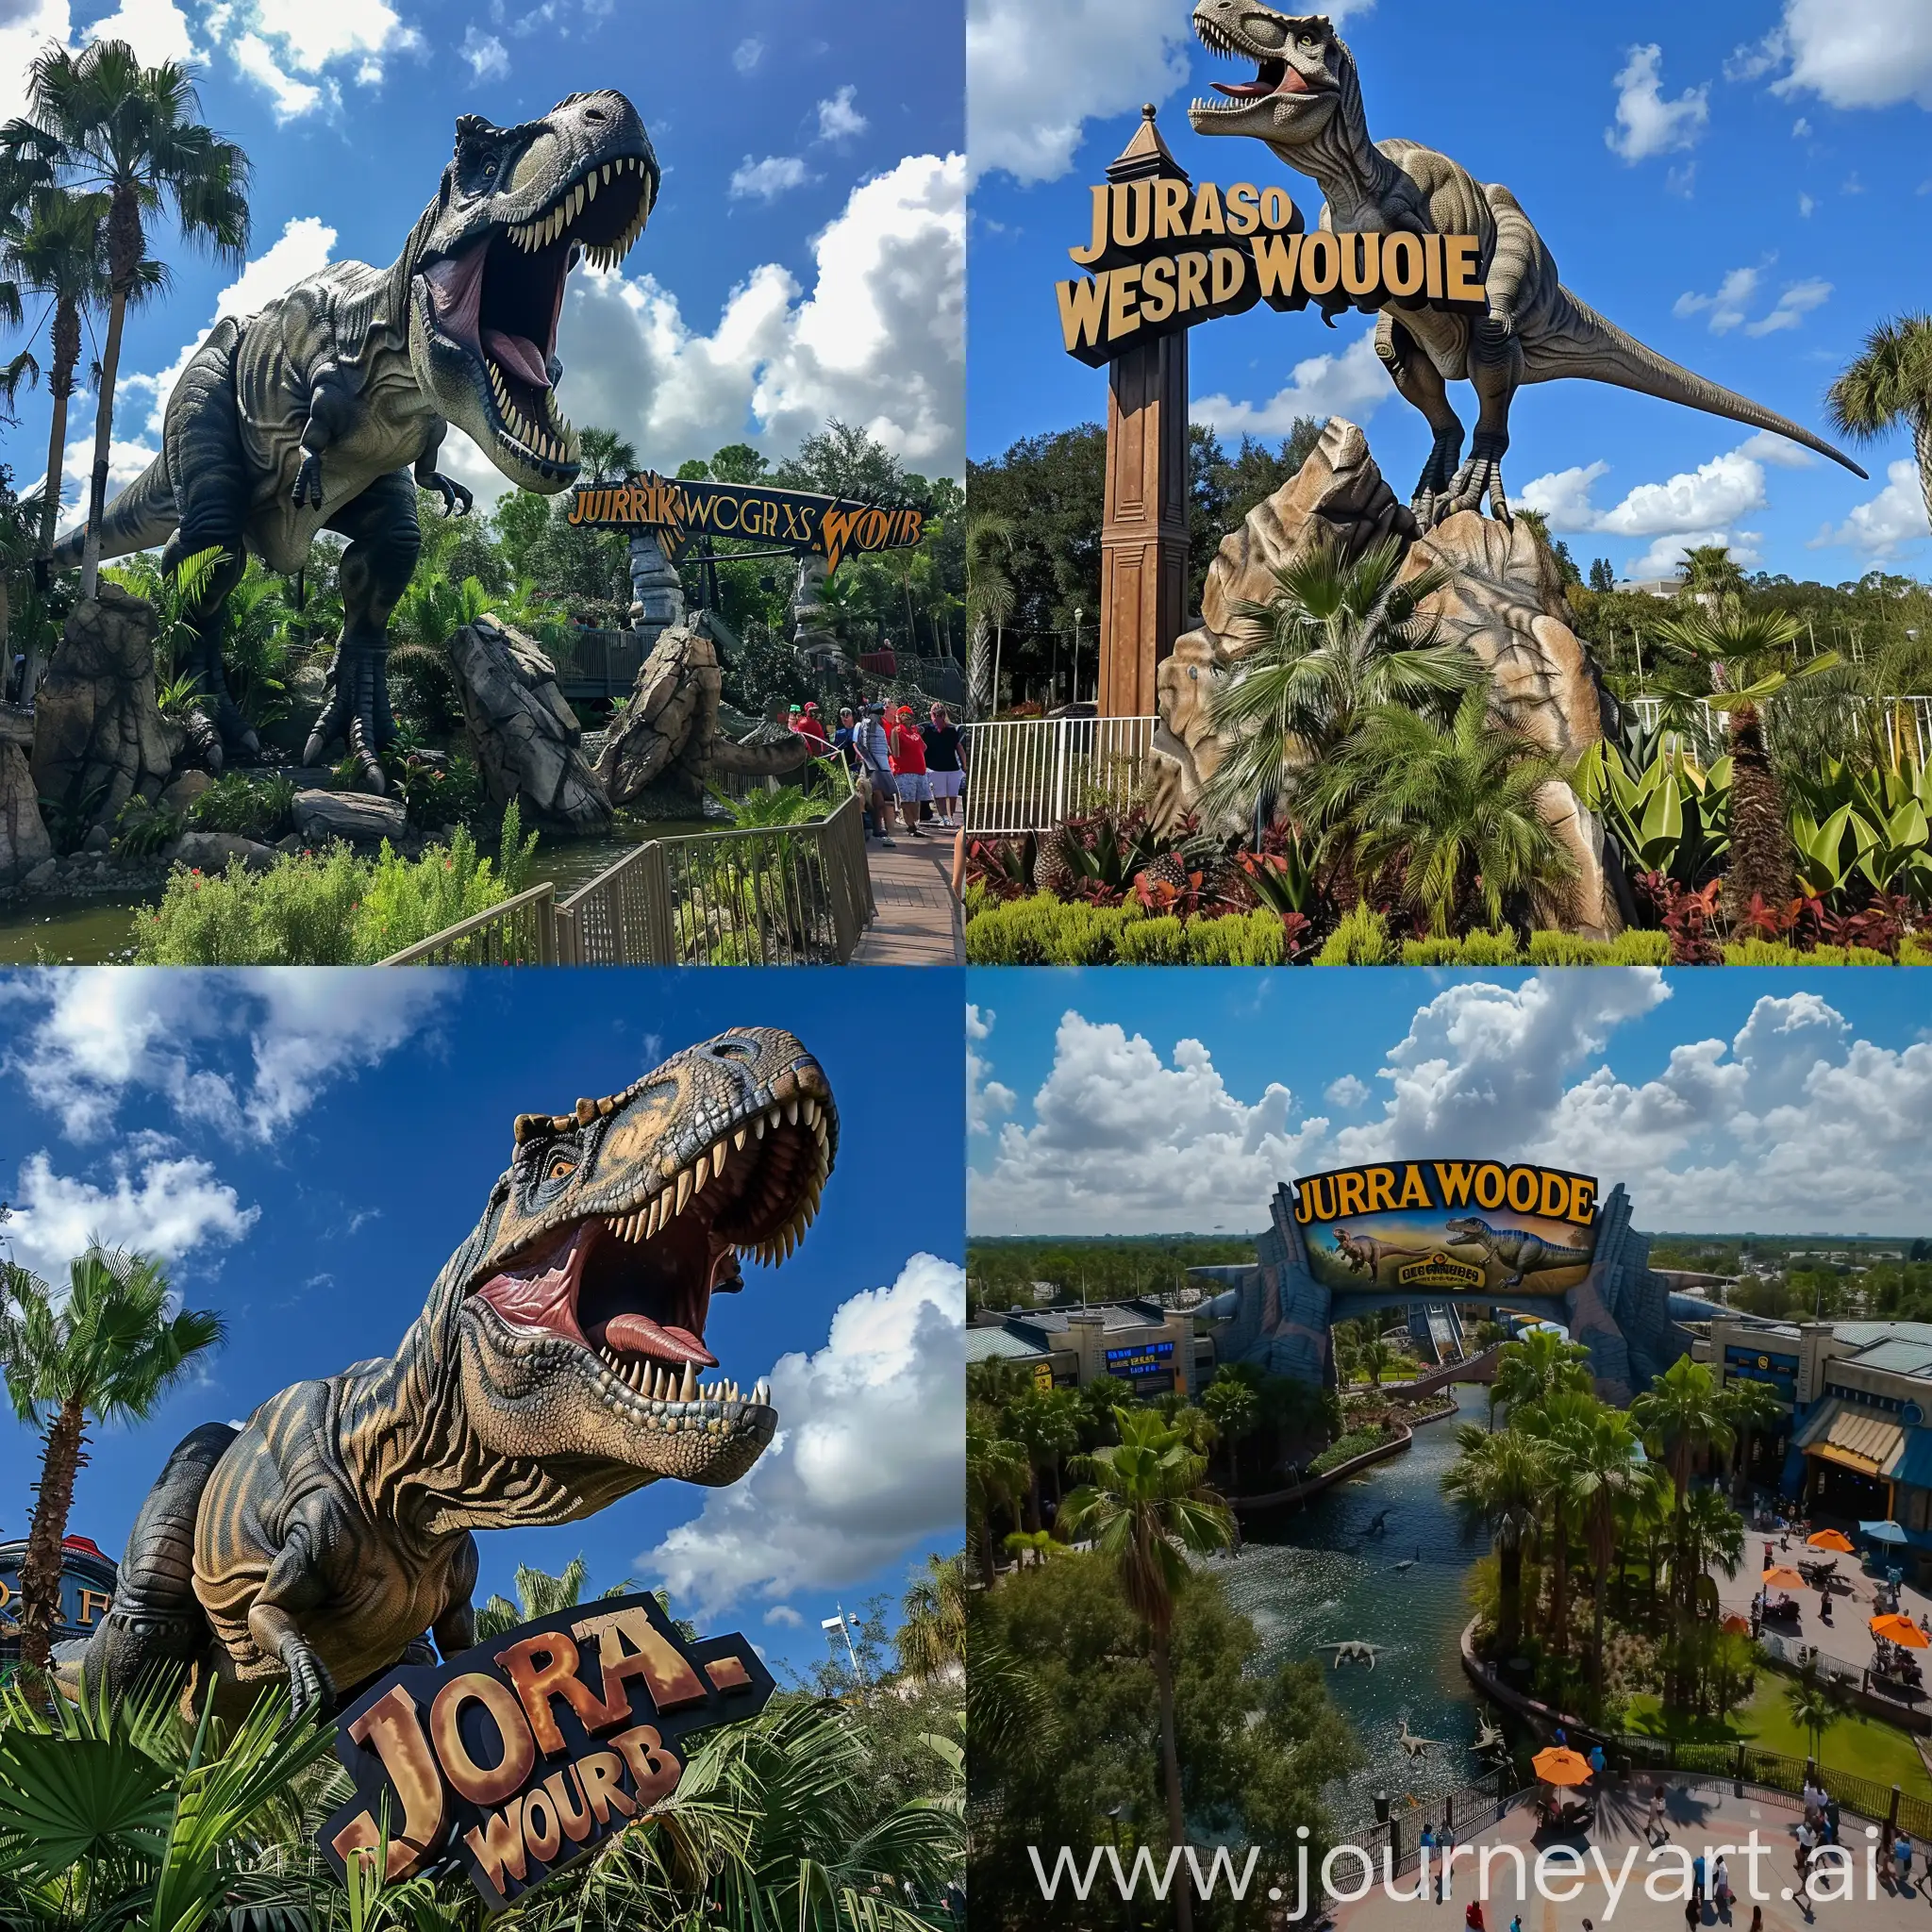 Exciting-Jurassic-World-Adventure-in-Tampa-Florida